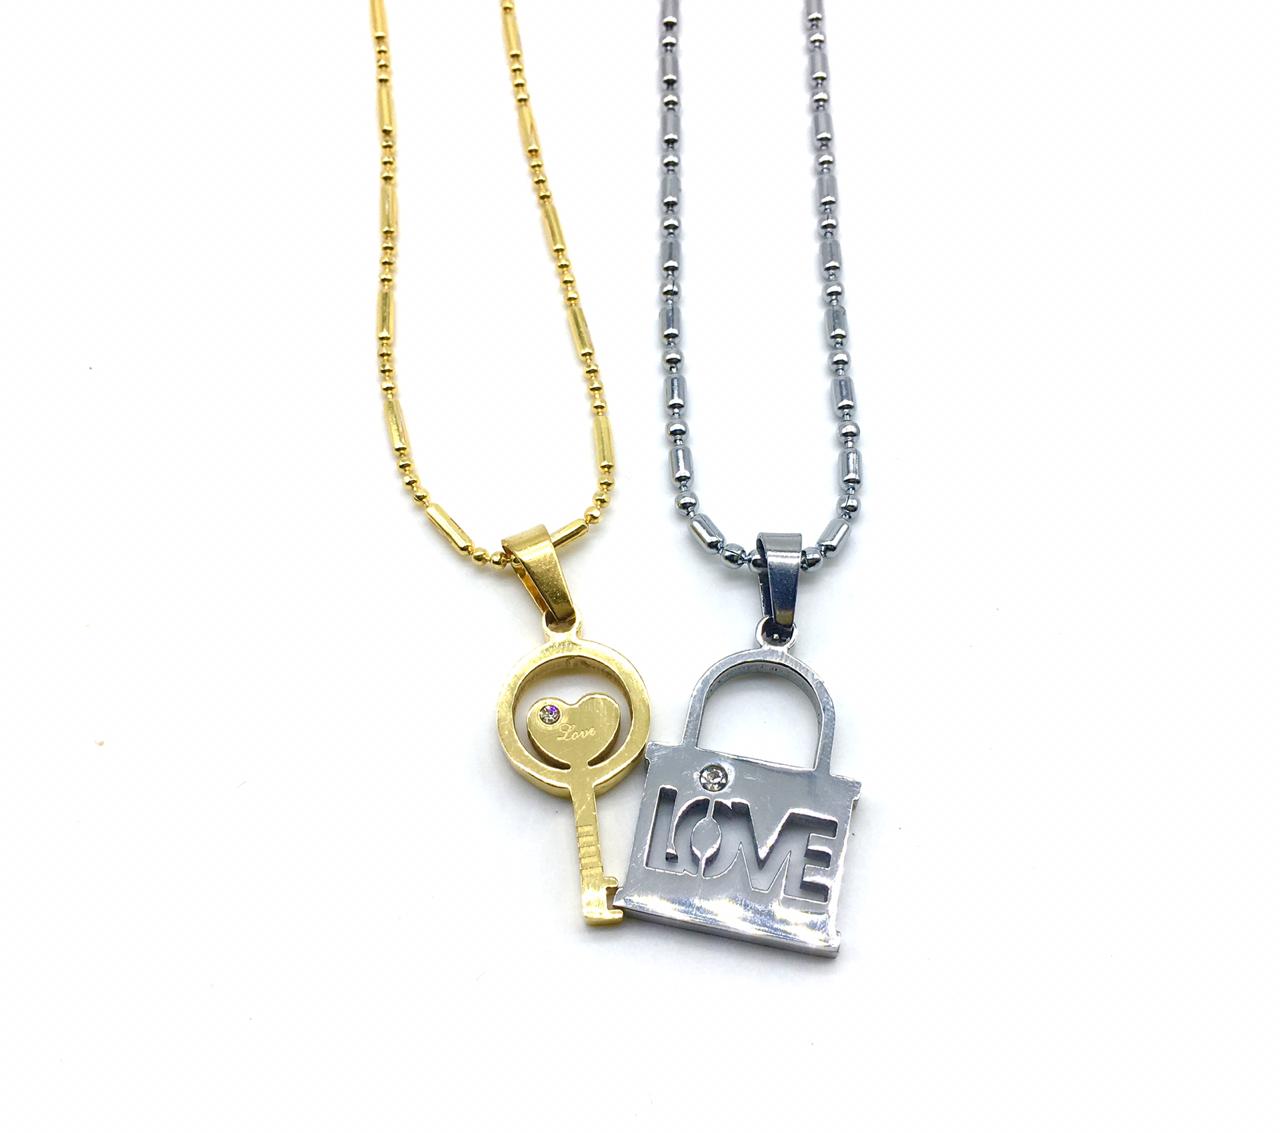 image for His And Her Necklaces Love Couples Accessories 2Pcs Chic Gold Silver Lock and Key Love Heart Pendant Puzzle Necklace